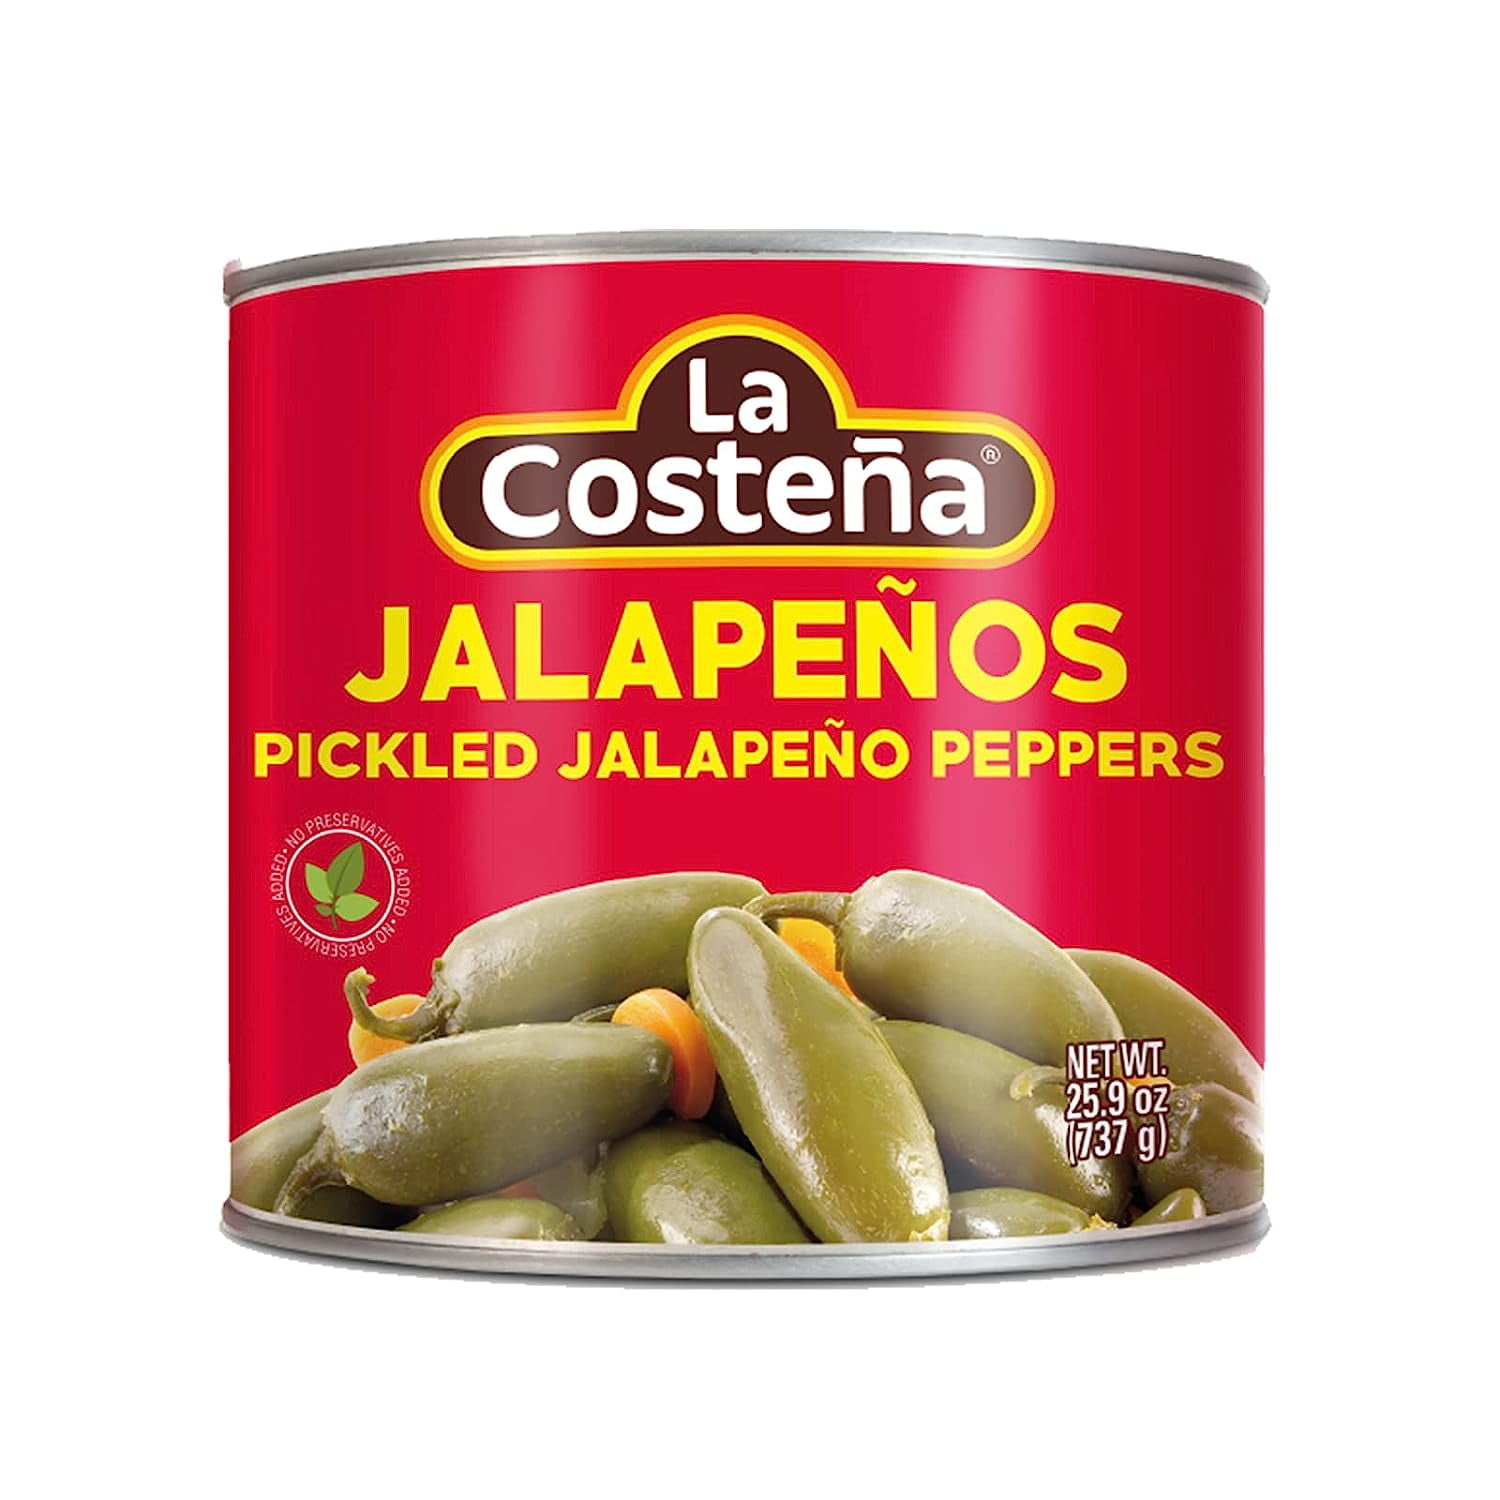 La Costena Green Pickled Jalapeno Peppers, 26 Oz